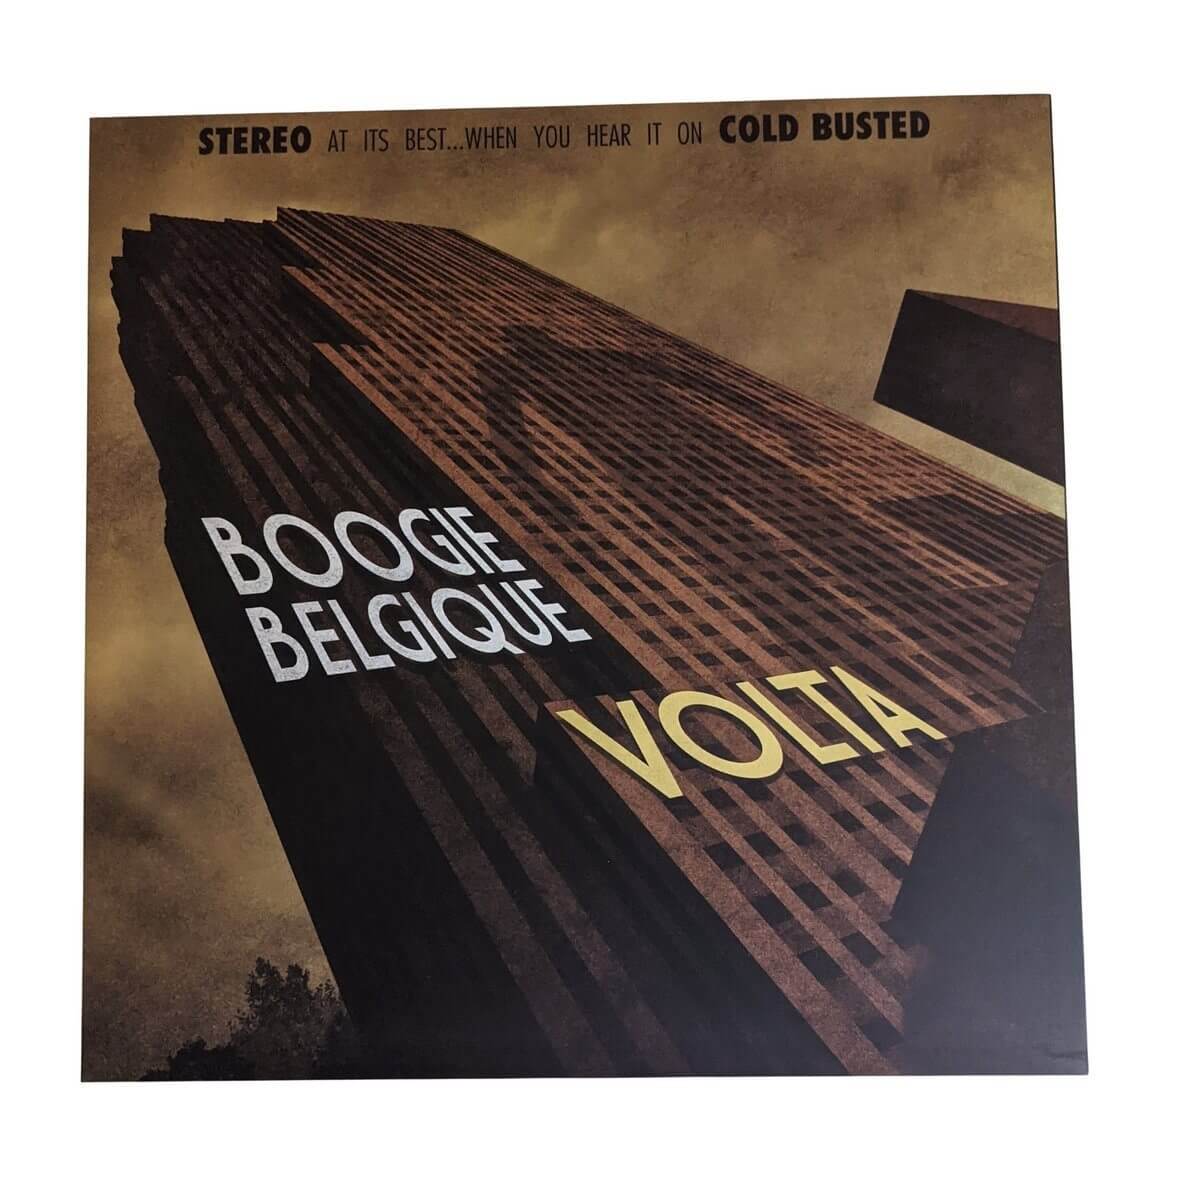 Boogie Belgique - Volta - Special Reissue Series 12 Inch Vinyl - Cold Busted